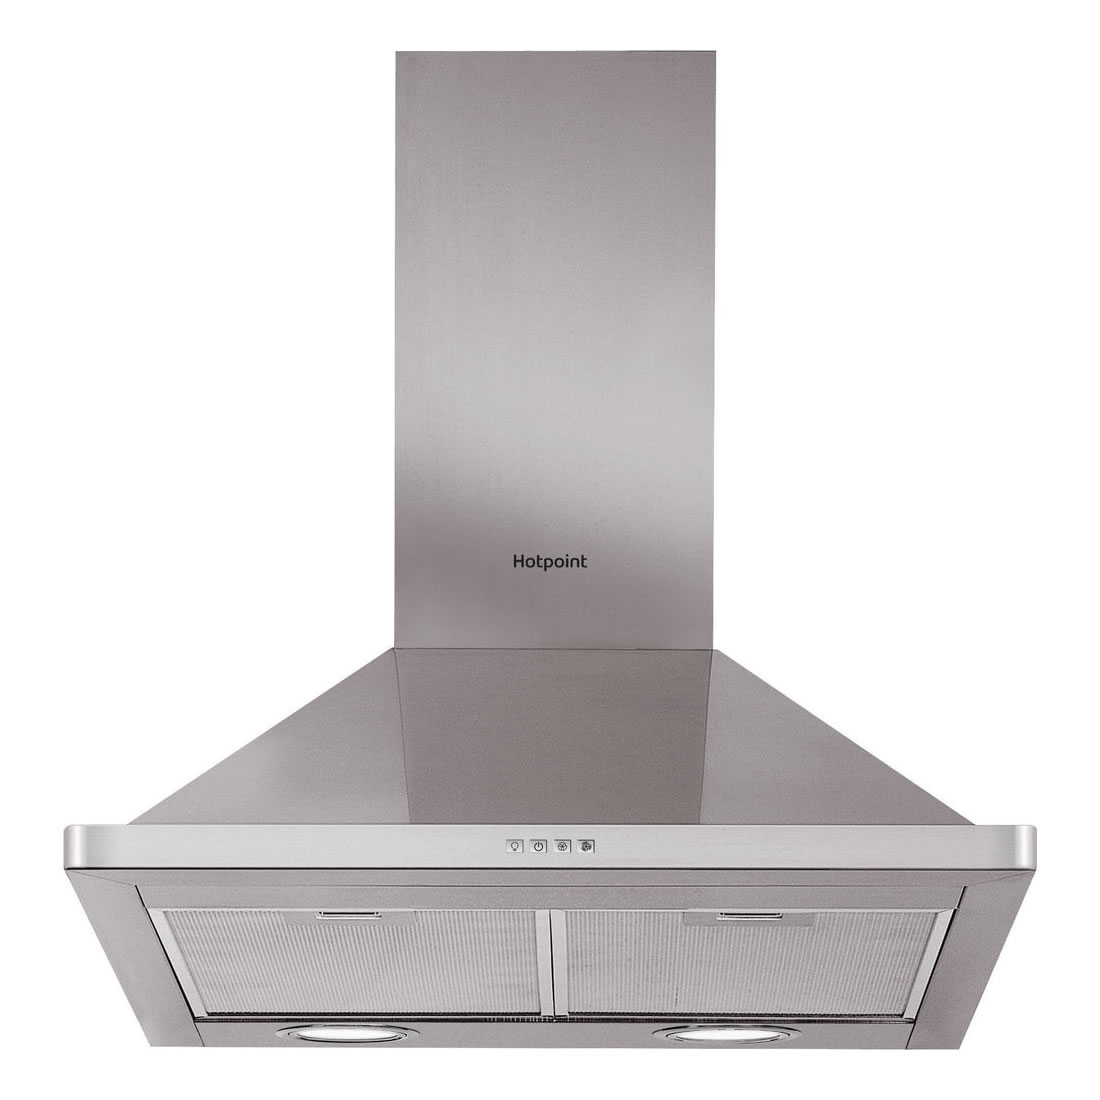 Hotpoint 600mm Cooker Hood 3-Speed Stainless Steel